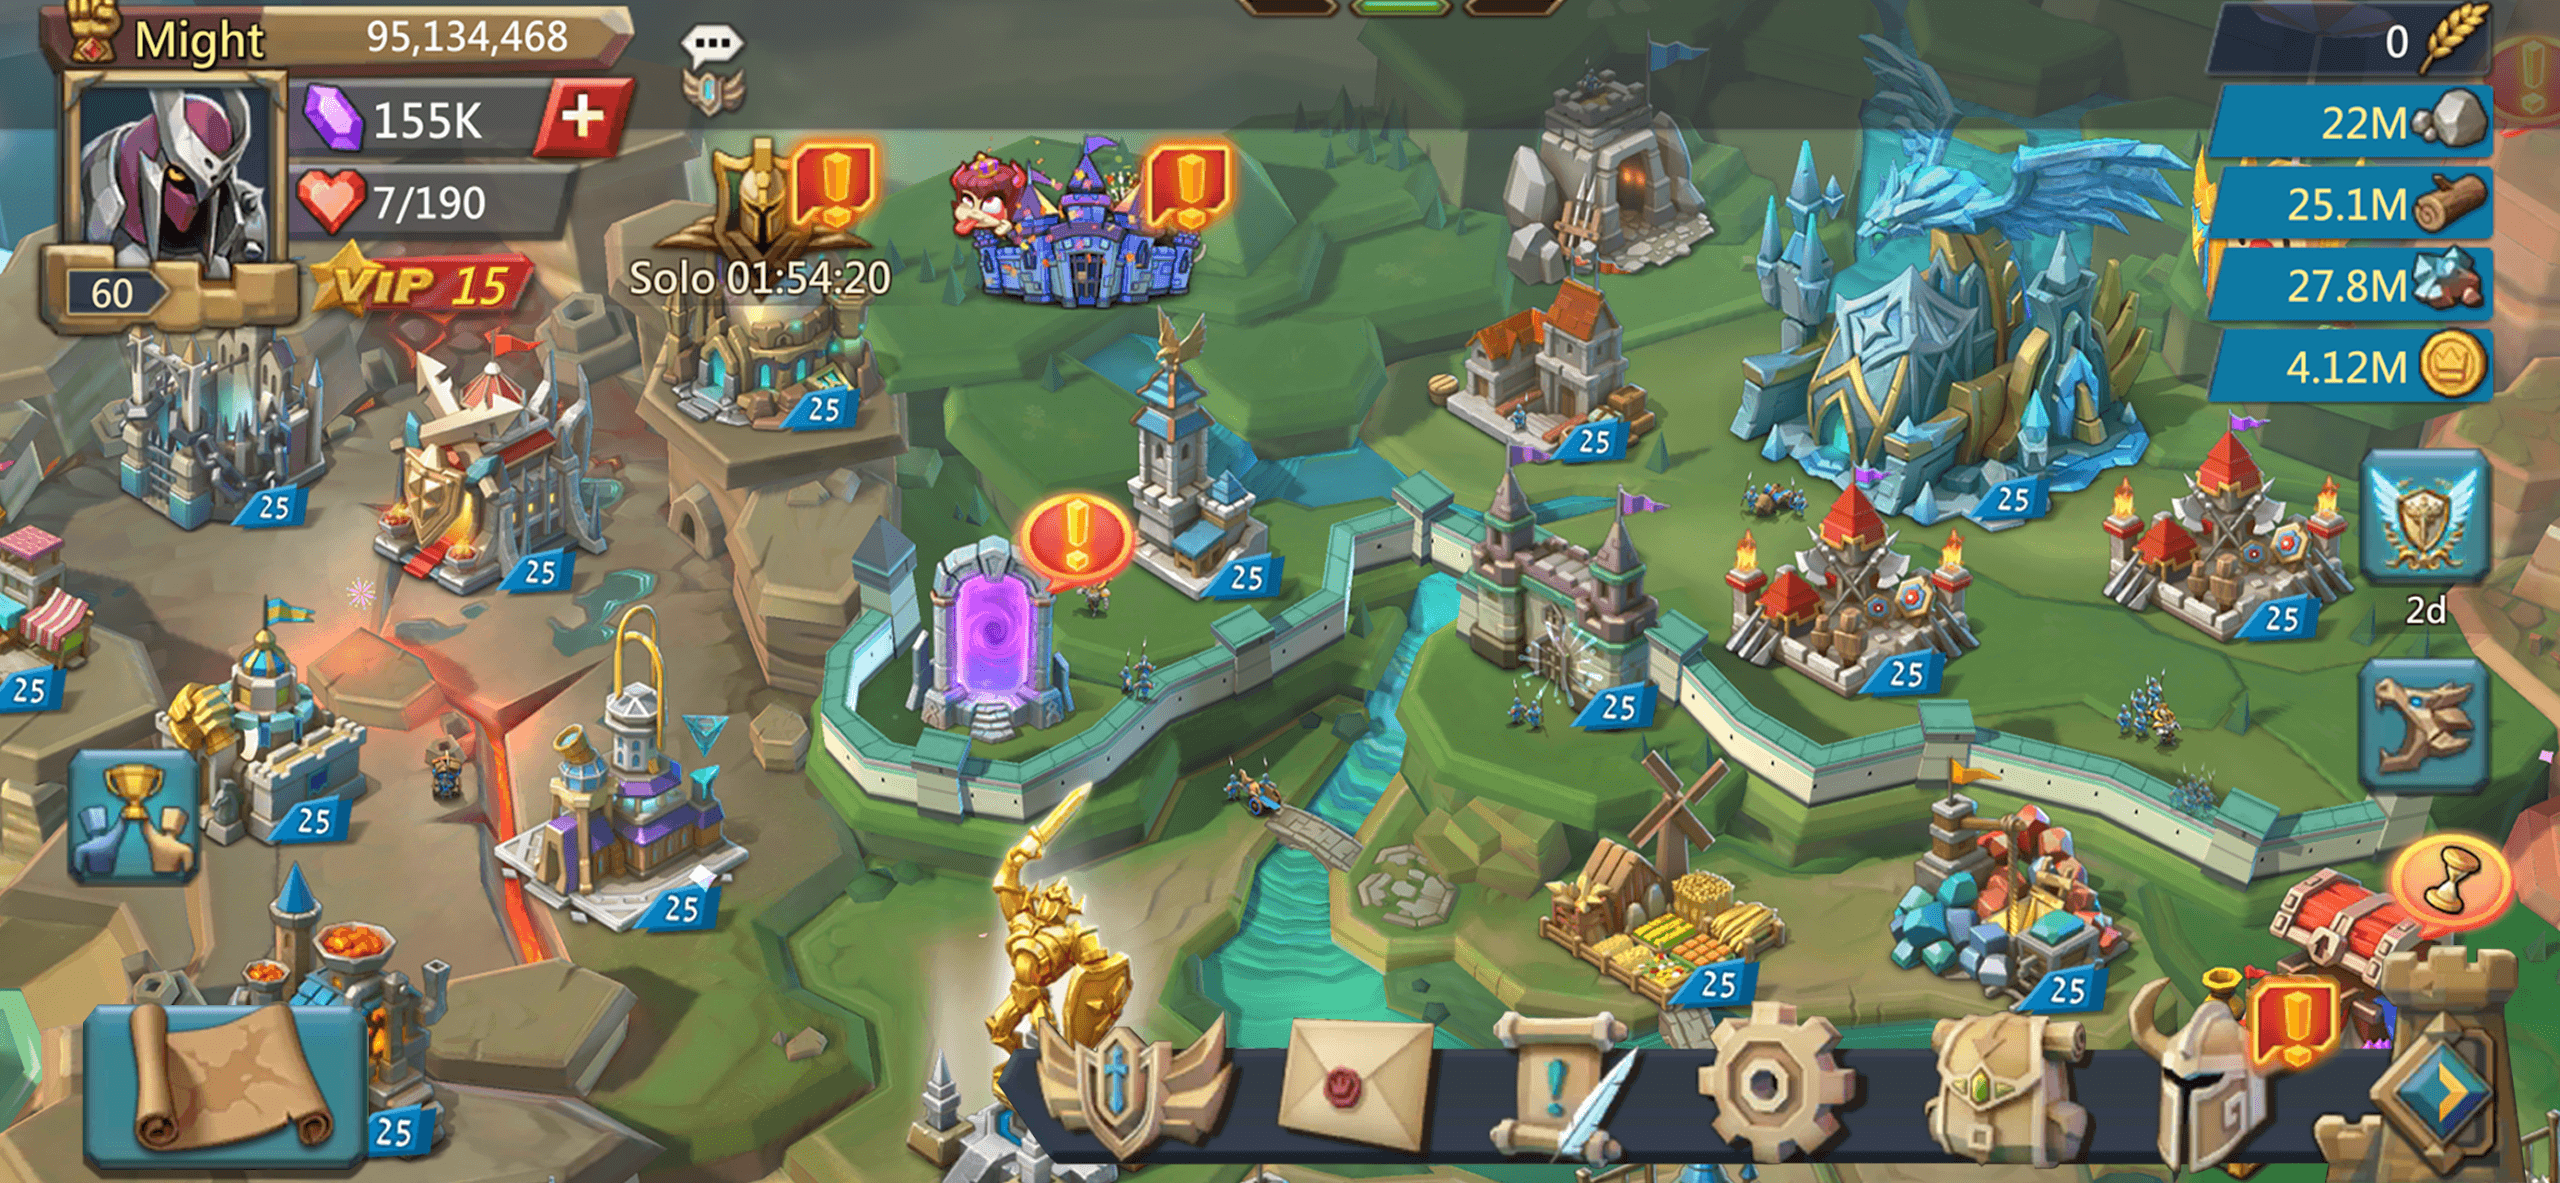 Conquer Kingdoms In Lords Mobile With This Exclusive BlueStacks